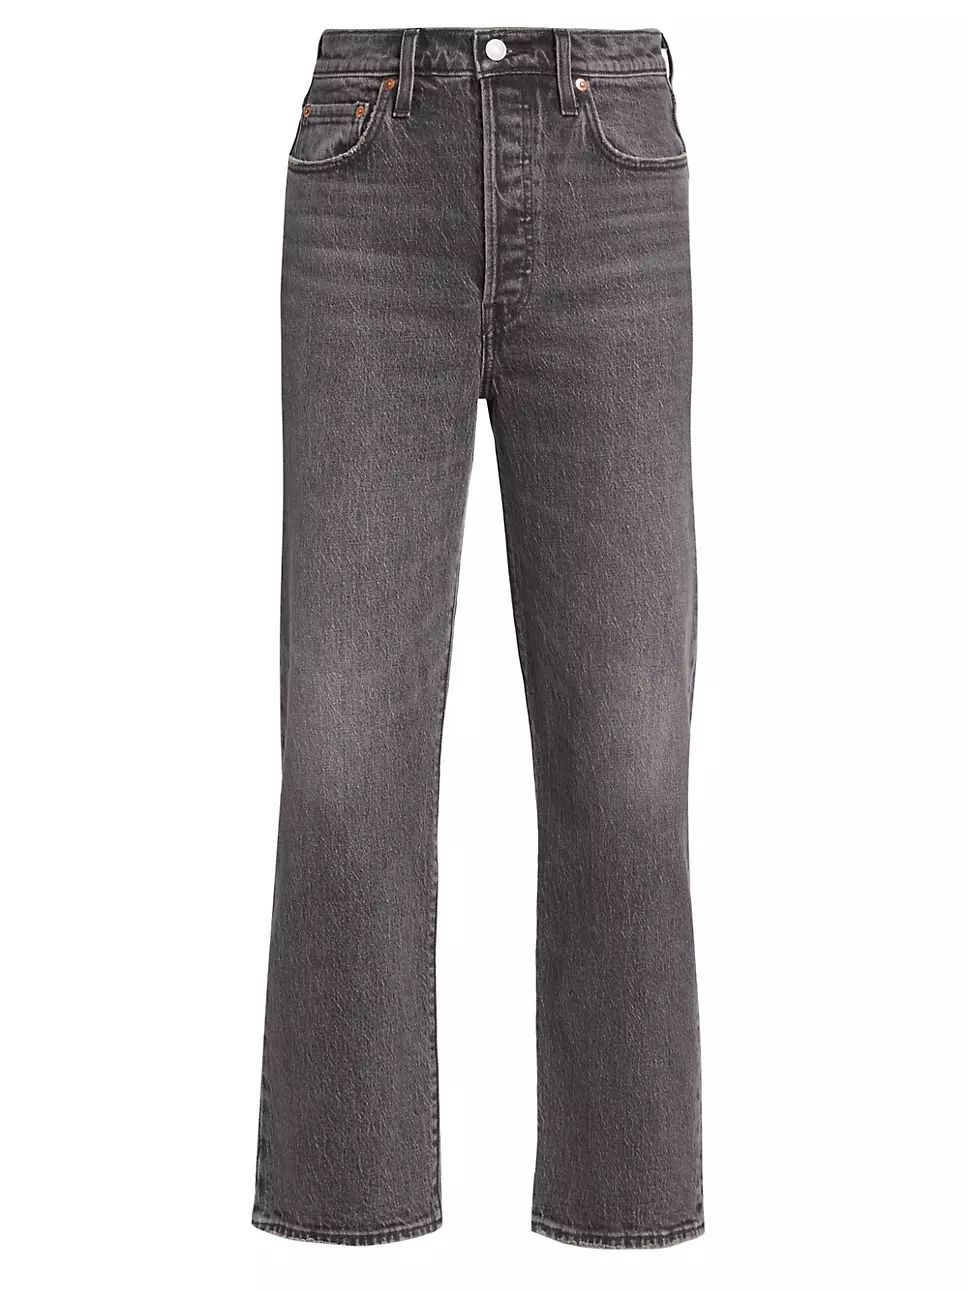 Ribcage Straight-Leg Ankle Jeans | Saks Fifth Avenue